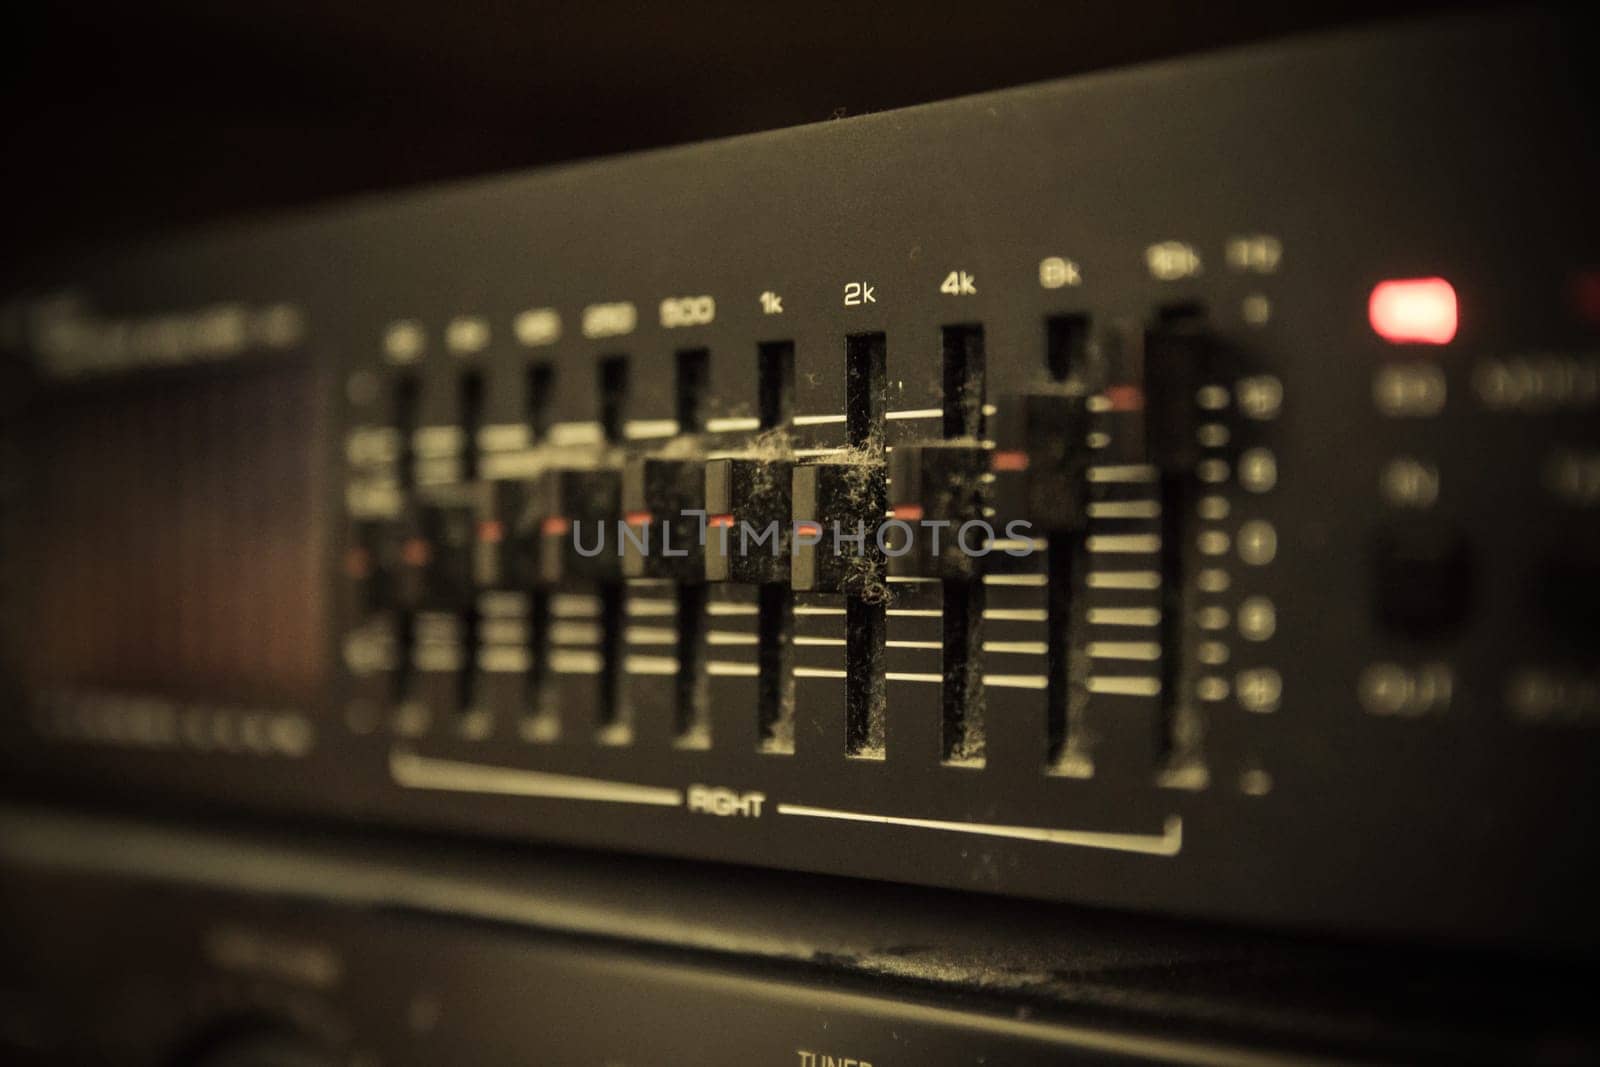 Graphic equalizer controls on an audio system by wavemovies